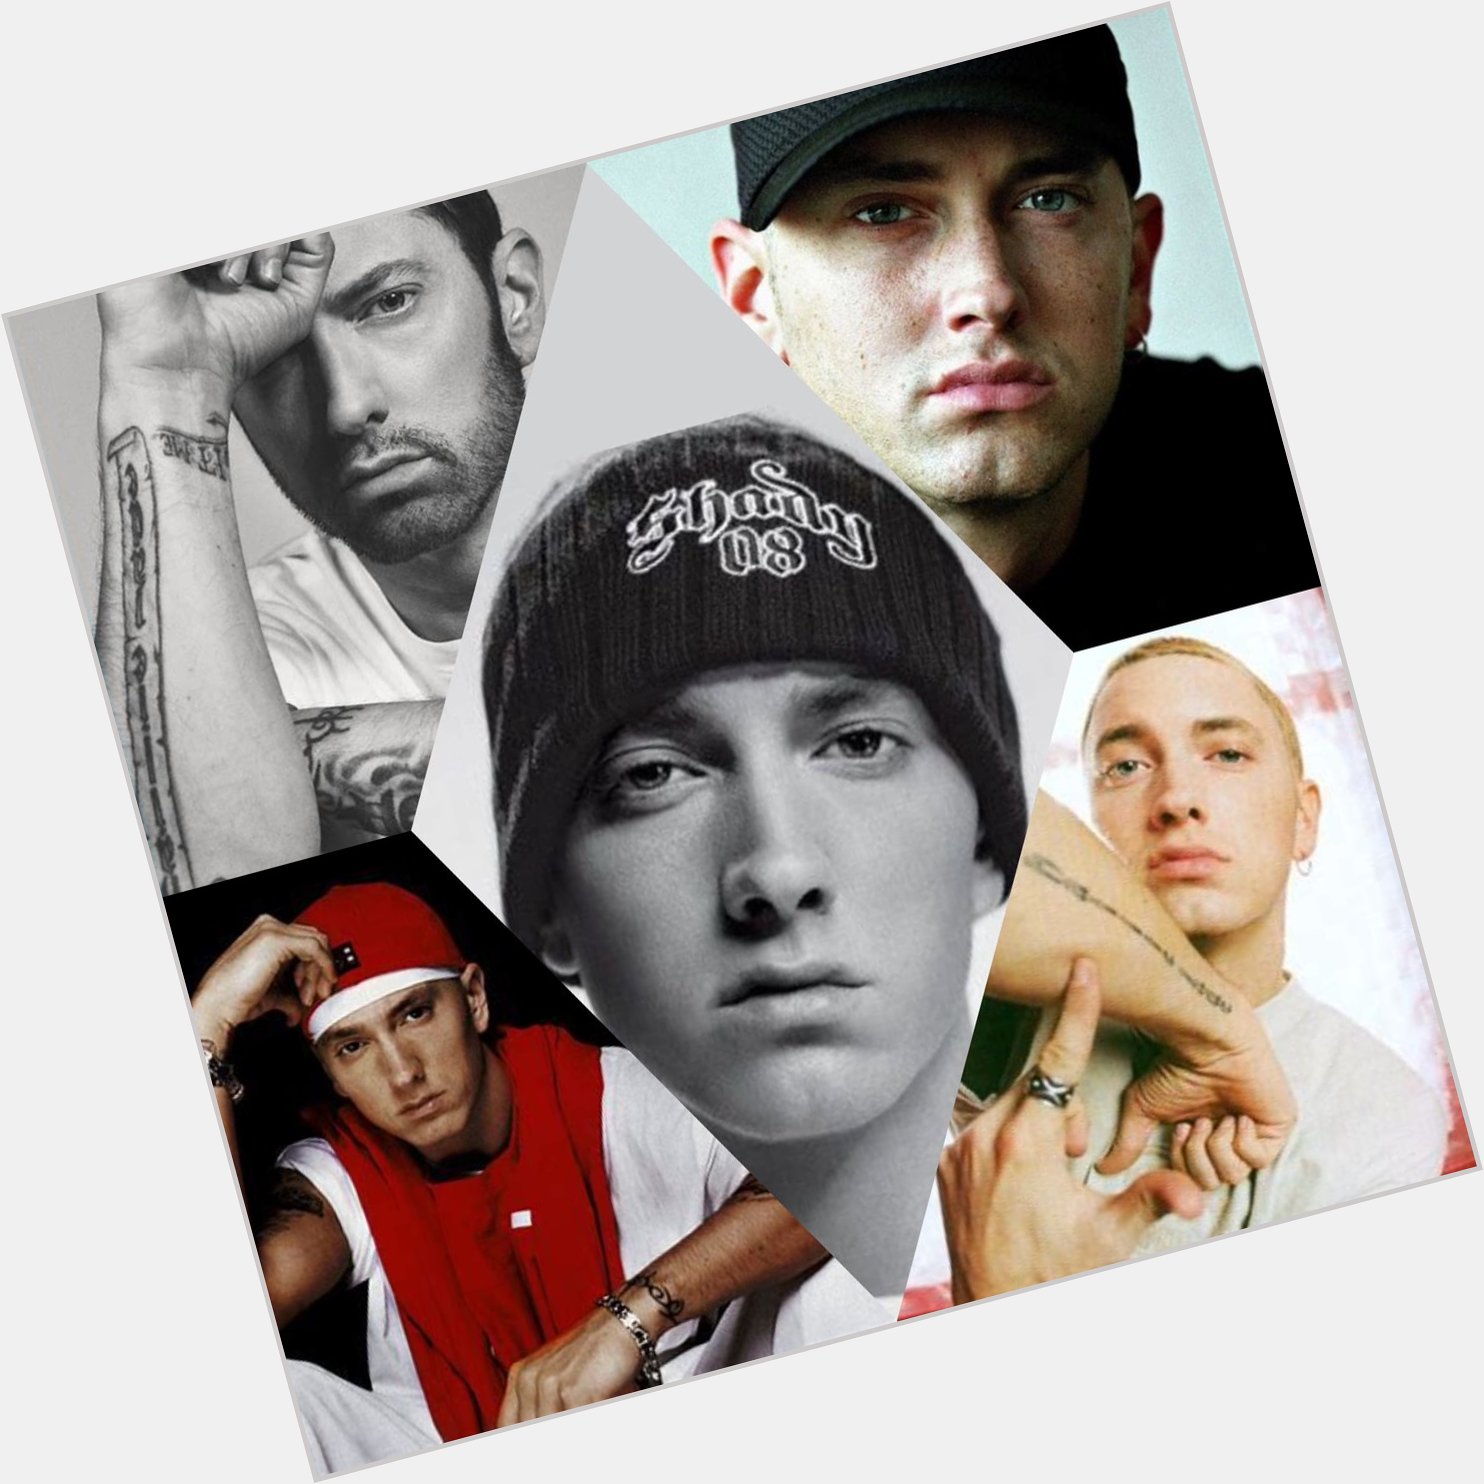 Happy 50th Birthday to Marshall Mathers, aka Eminem the King of Hip/hop, an unrivalled legend  